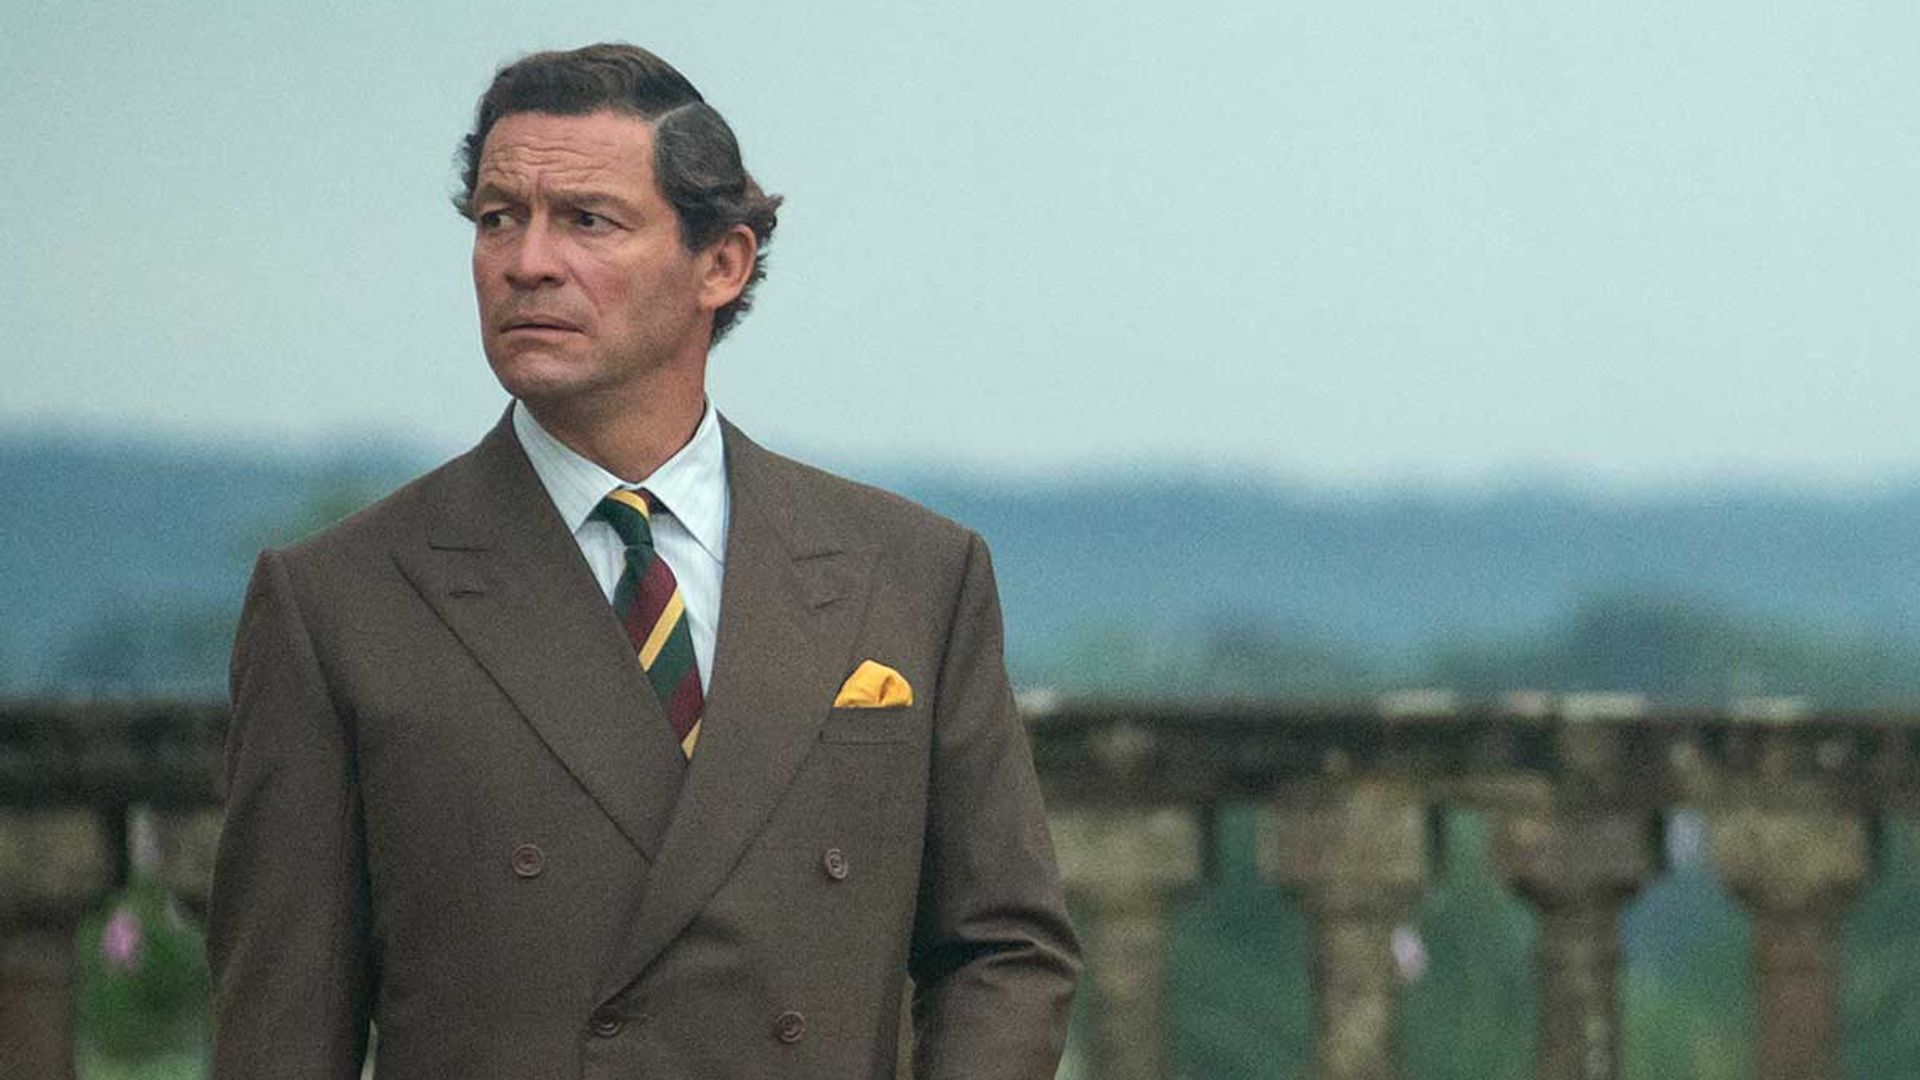 The Crown star Dominic West reveals surprise at being cast as Prince Charles - and friendship with the royal